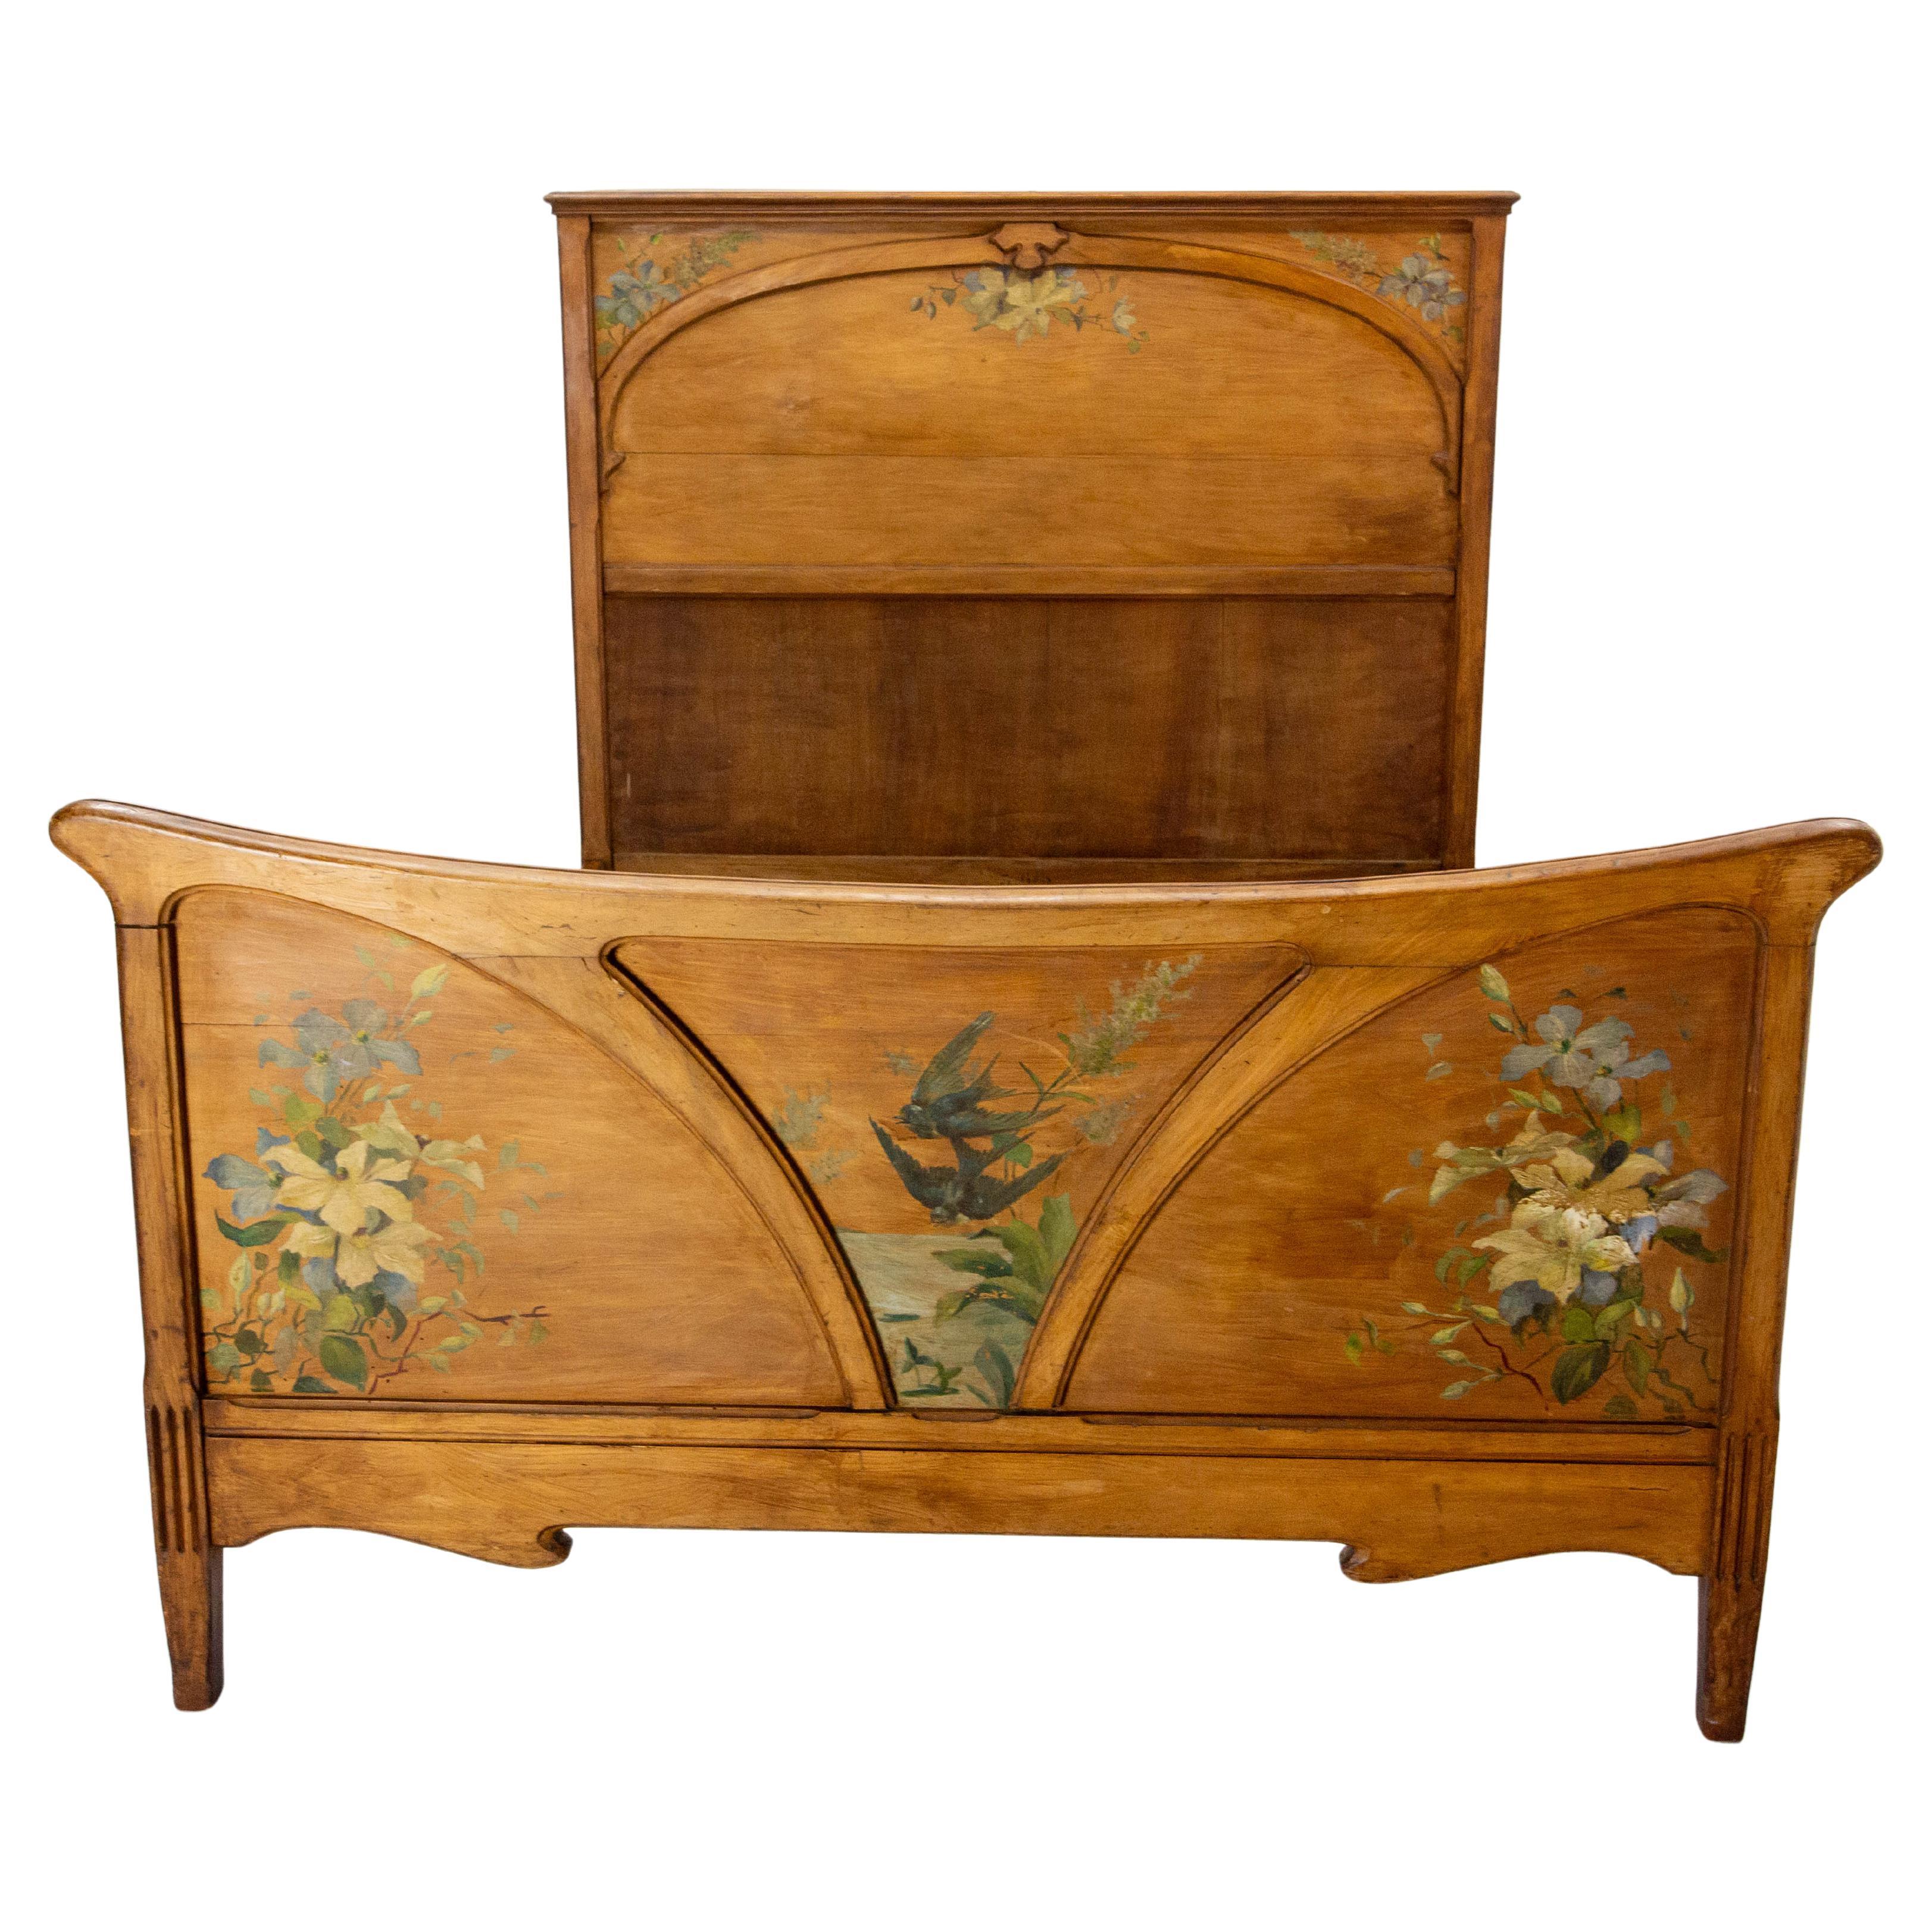 French Art Nouveau Painted Massive Beech Bed Full Size or Double Bed, circa 1890 For Sale